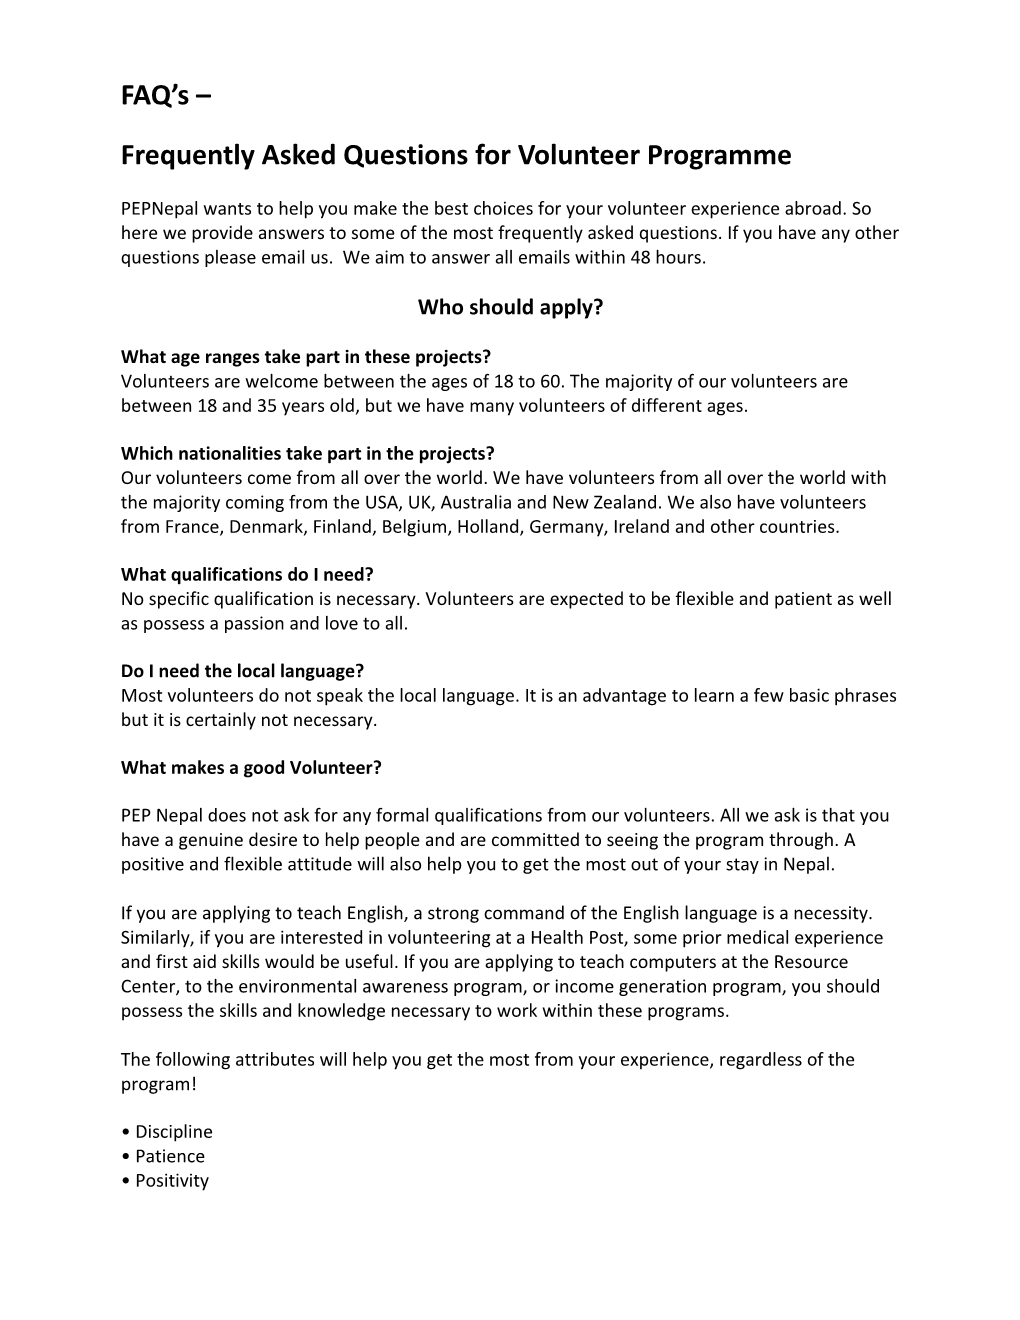 Frequently Asked Questions for Volunteer Programme